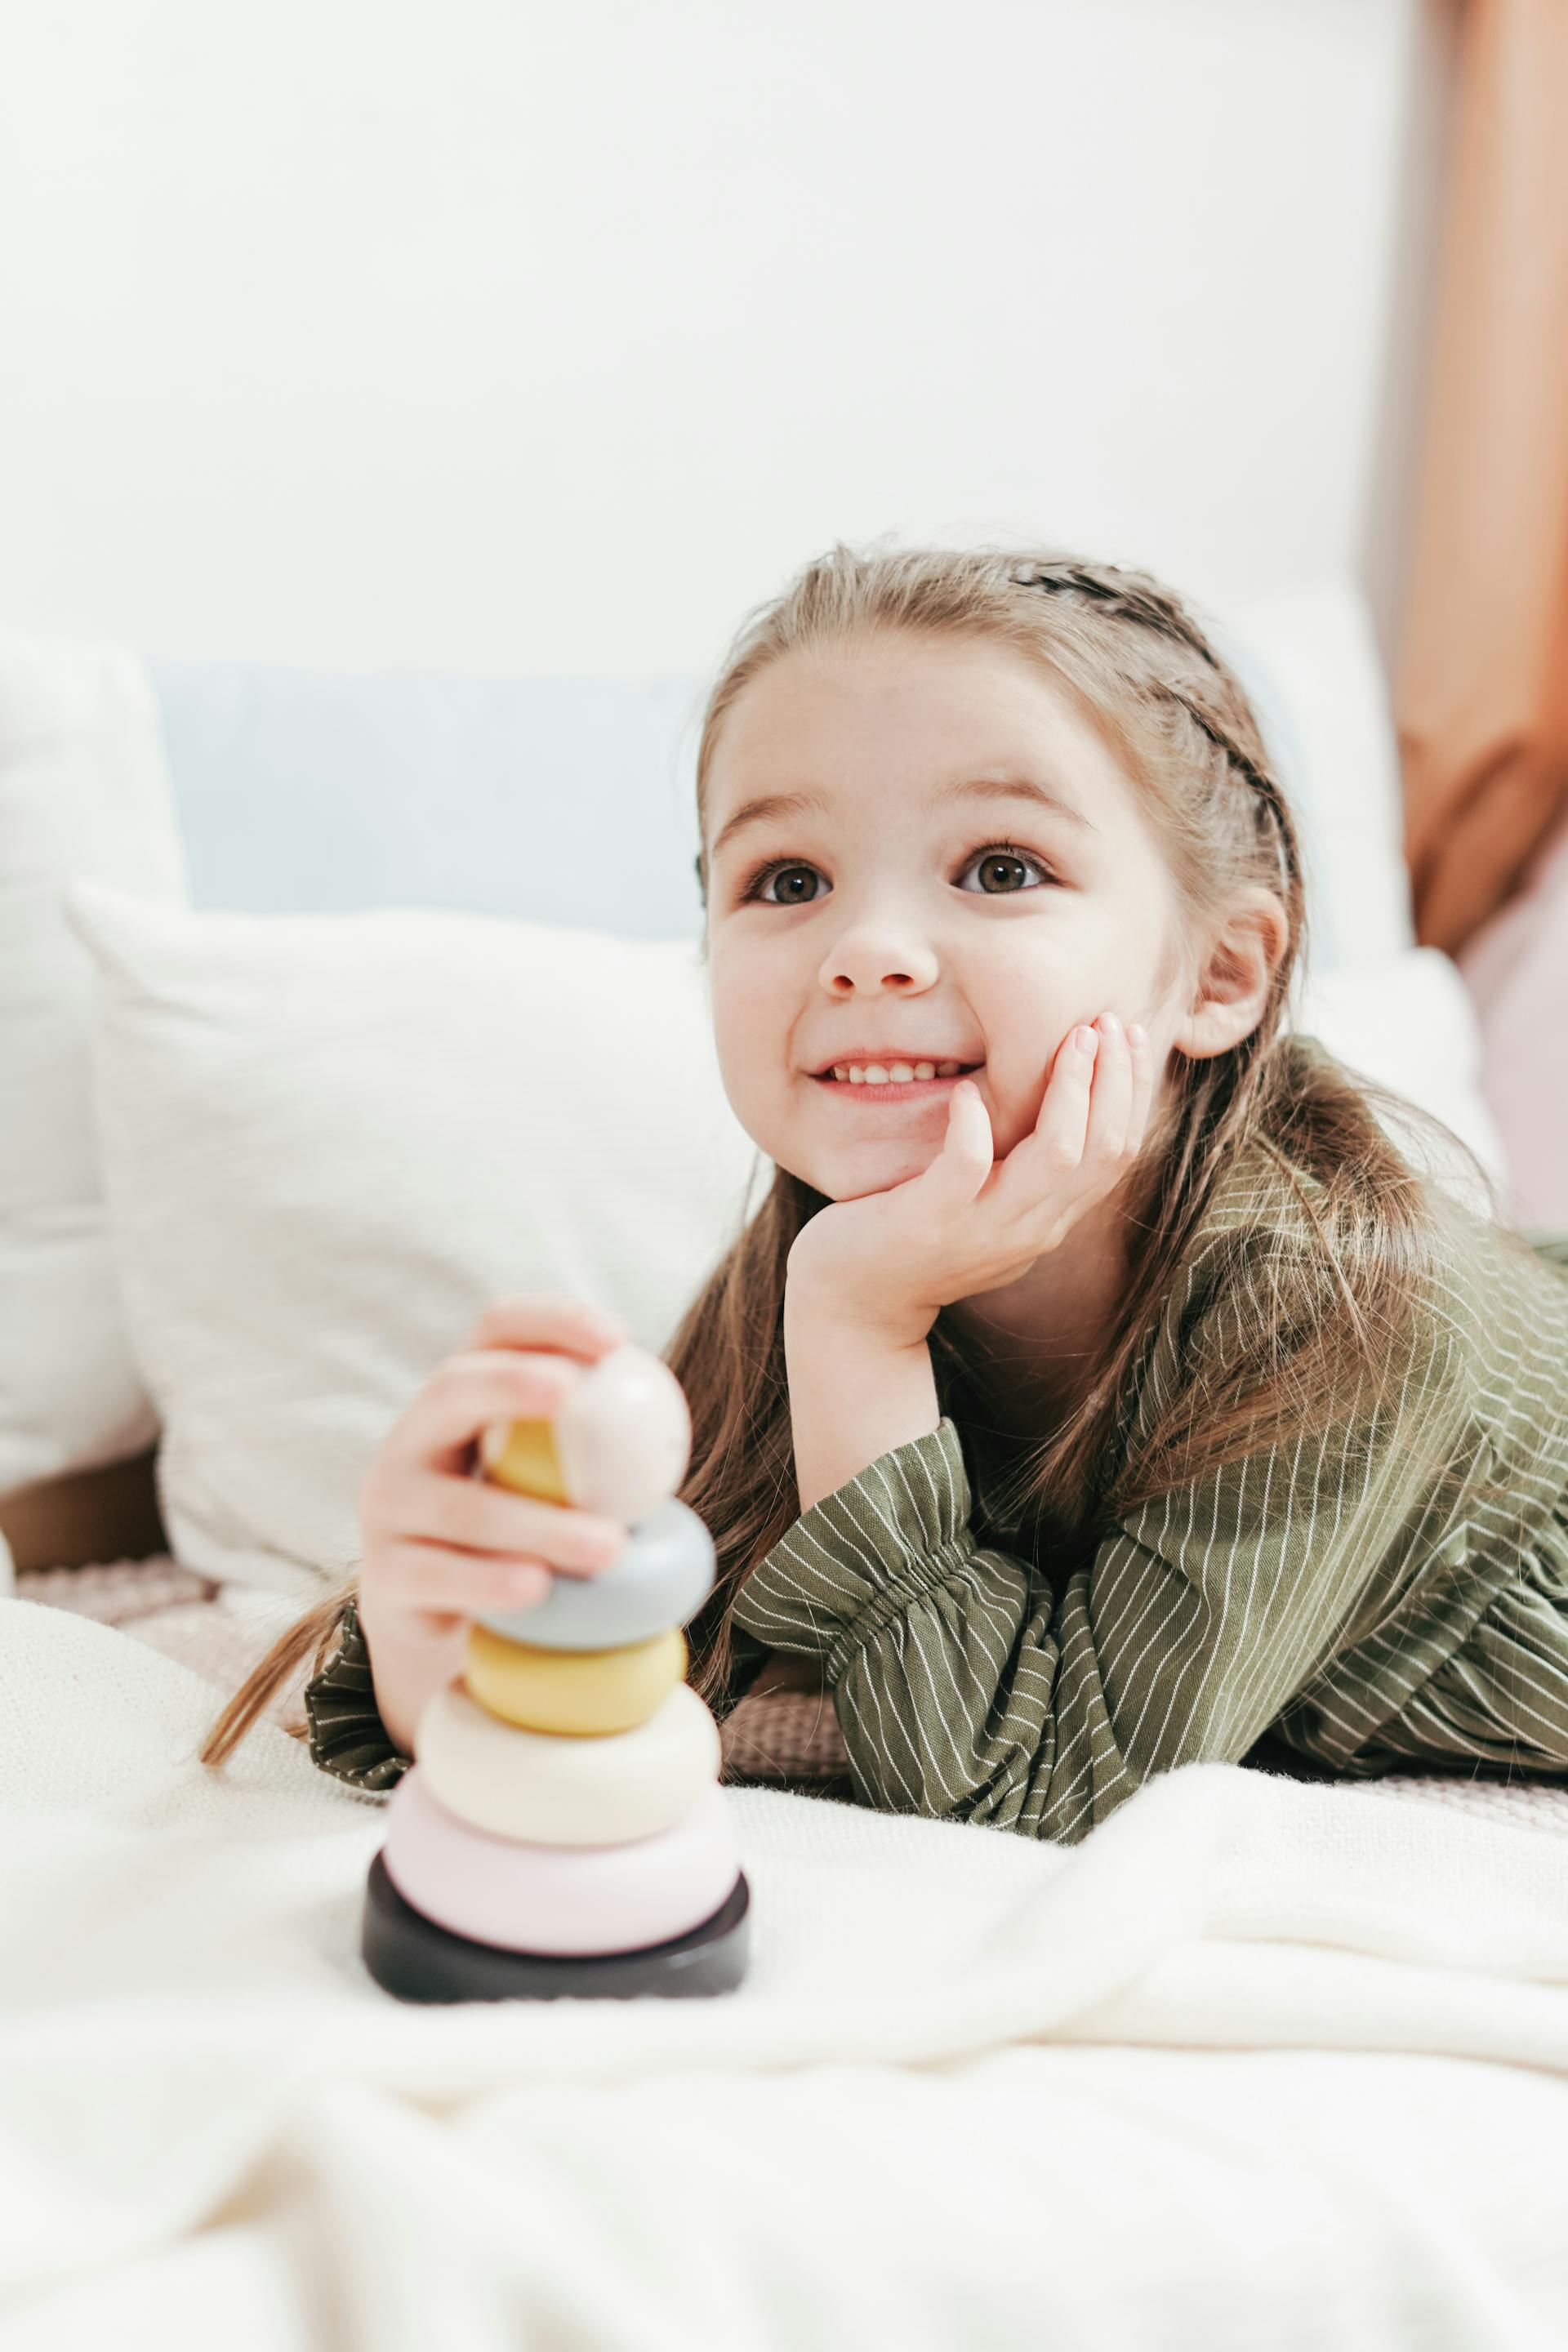 A little girl playing with her toys | Source: Pexels